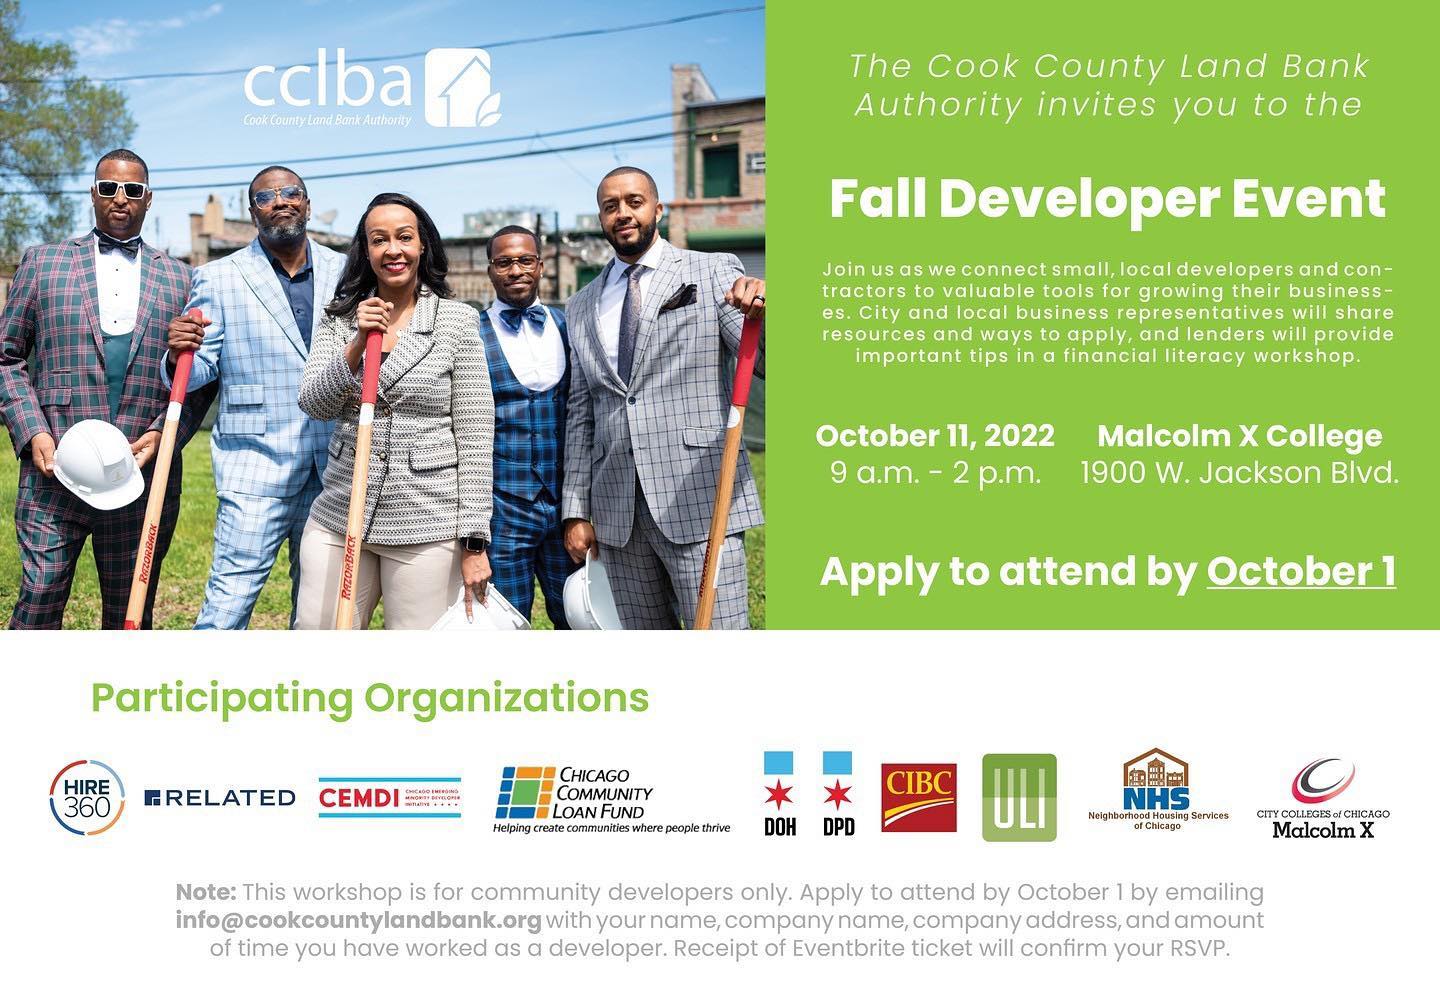 .

#repost @cookcountylandbankauthority 

Apply to join us for the Land Bank’s Fall Developer Event on October 11! Network with local professionals and get connected to valuable resources to grow your business, and how the Land Bank can help. How to register: By 10/1, email info@cookcountylandbank.org with your name, company name, company address, and amount of time you have worked as a developer or contractor. Can’t wait to see you on 10/11! #landbank #landbanking #networking #professionalevent #cookcountyprofessionals #chicagosmallbusiness